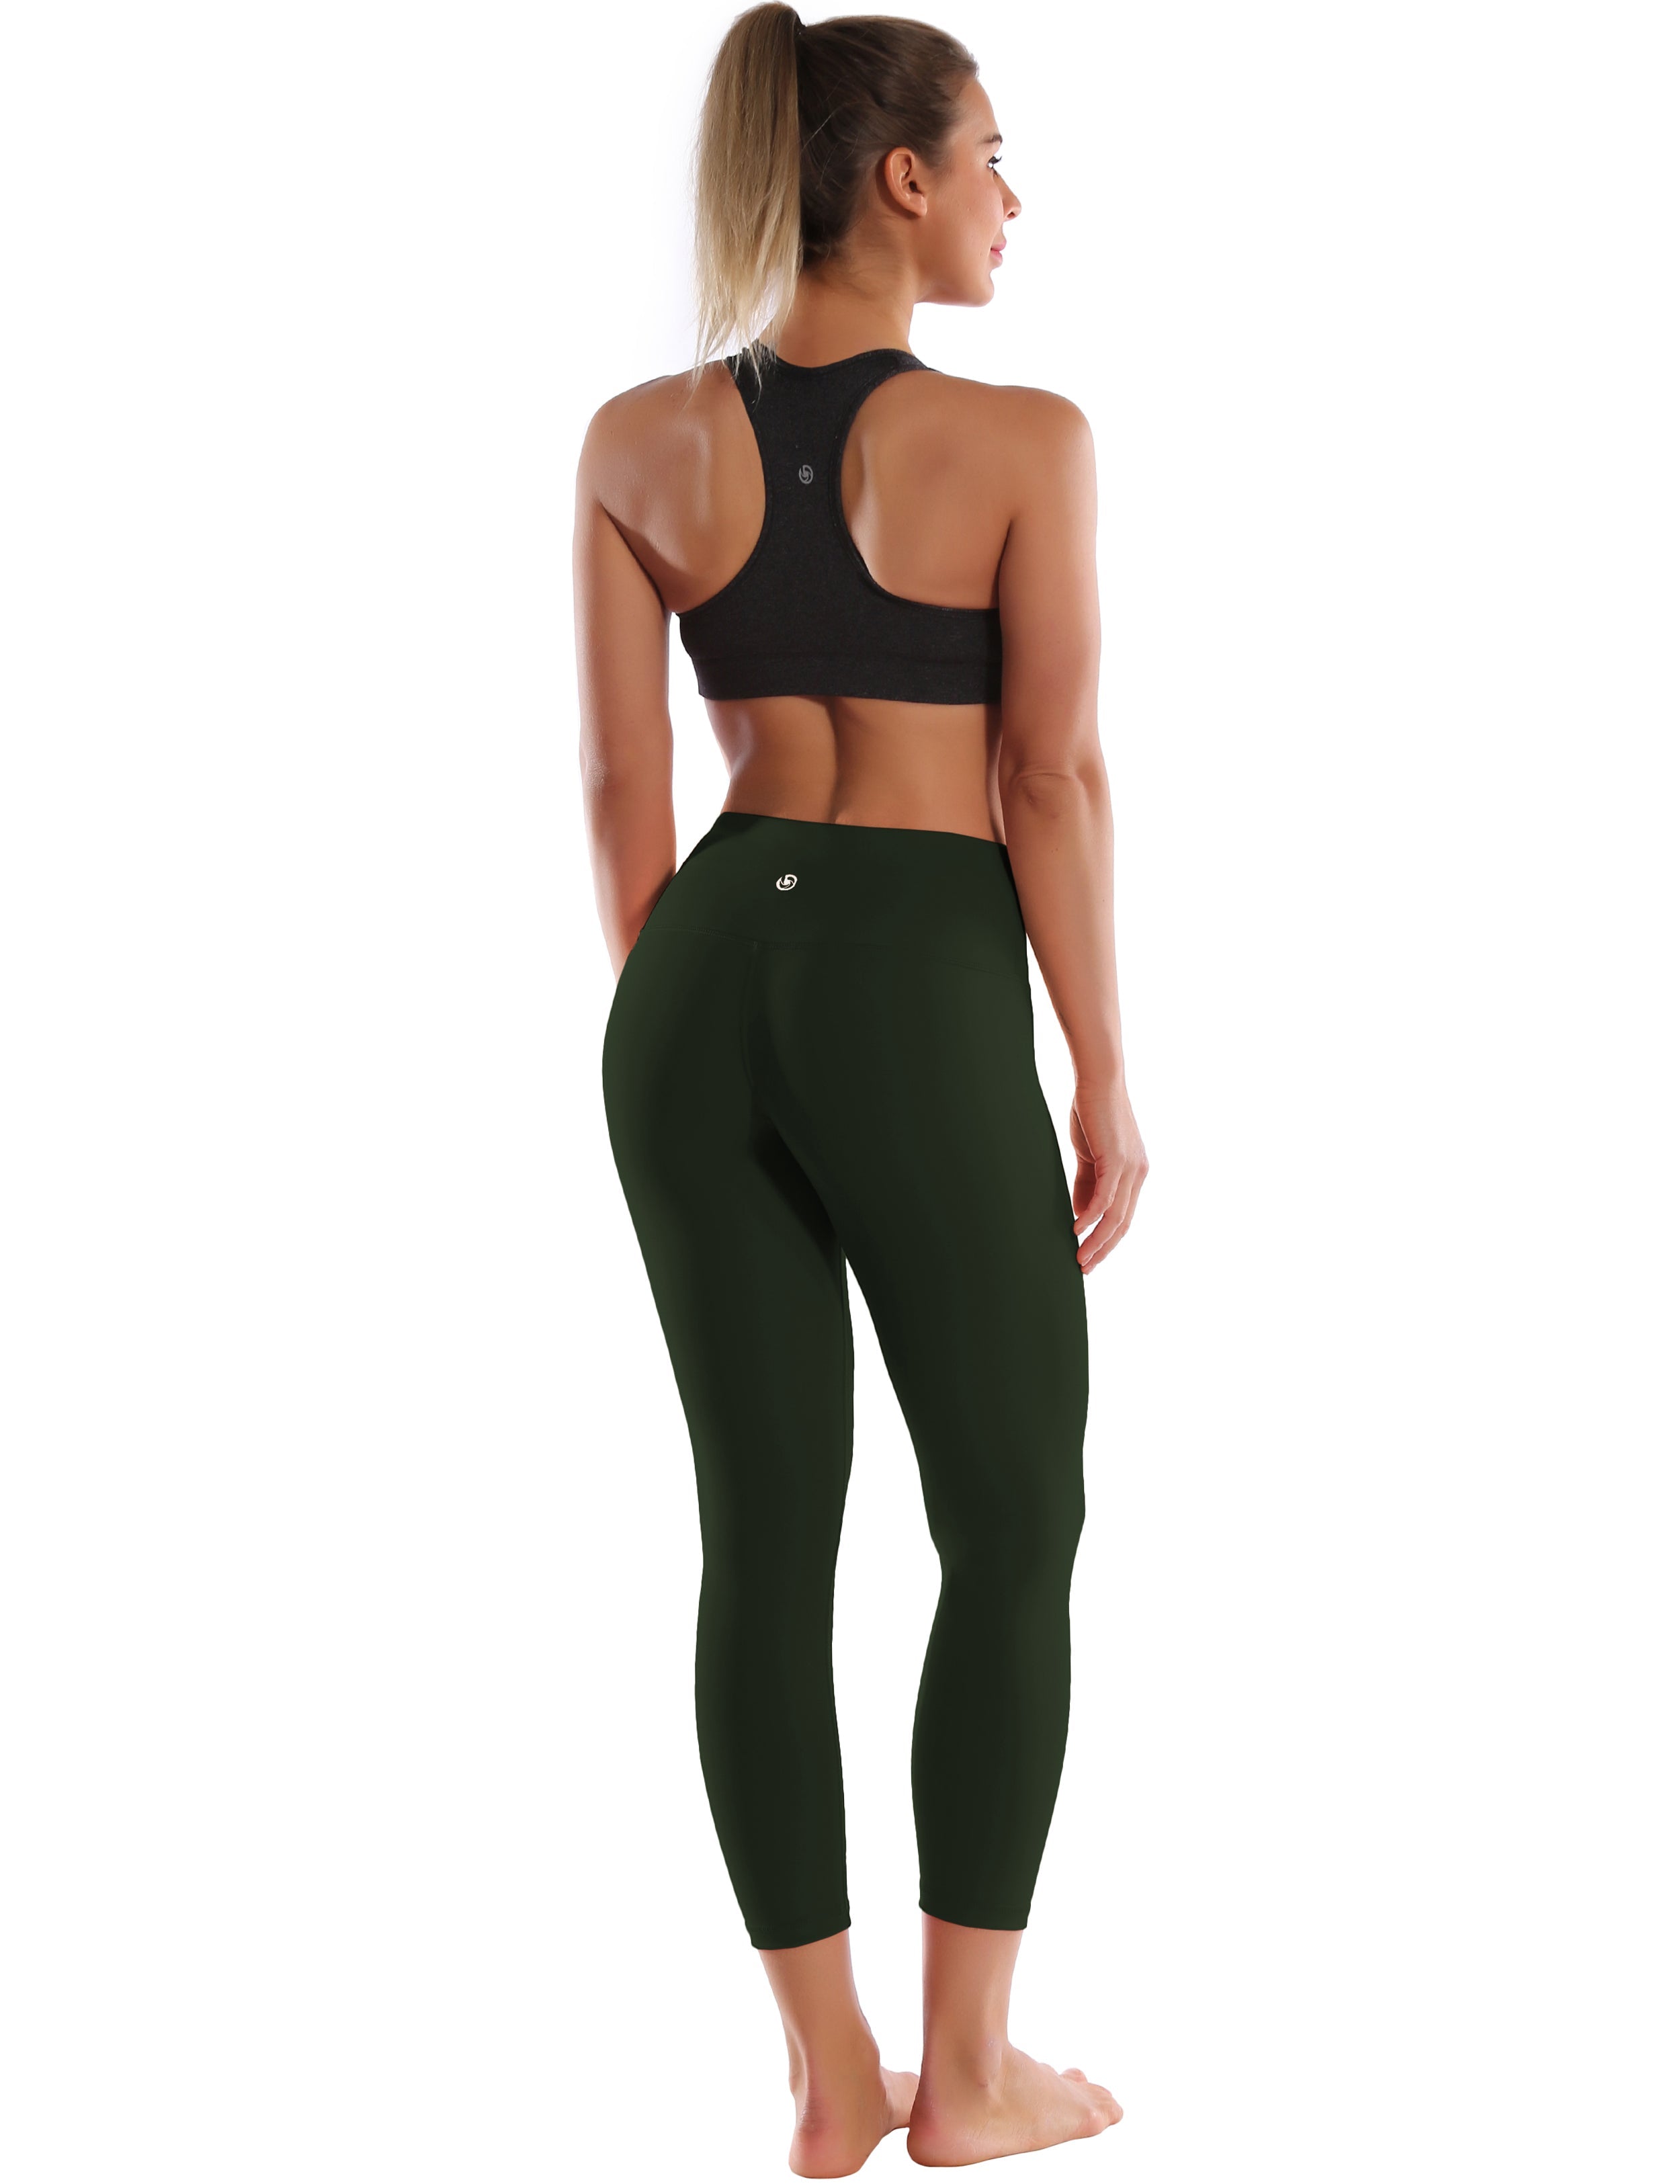 22" High Waist Crop Tight Capris olivegray 75%Nylon/25%Spandex Fabric doesn't attract lint easily 4-way stretch No see-through Moisture-wicking Tummy control Inner pocket